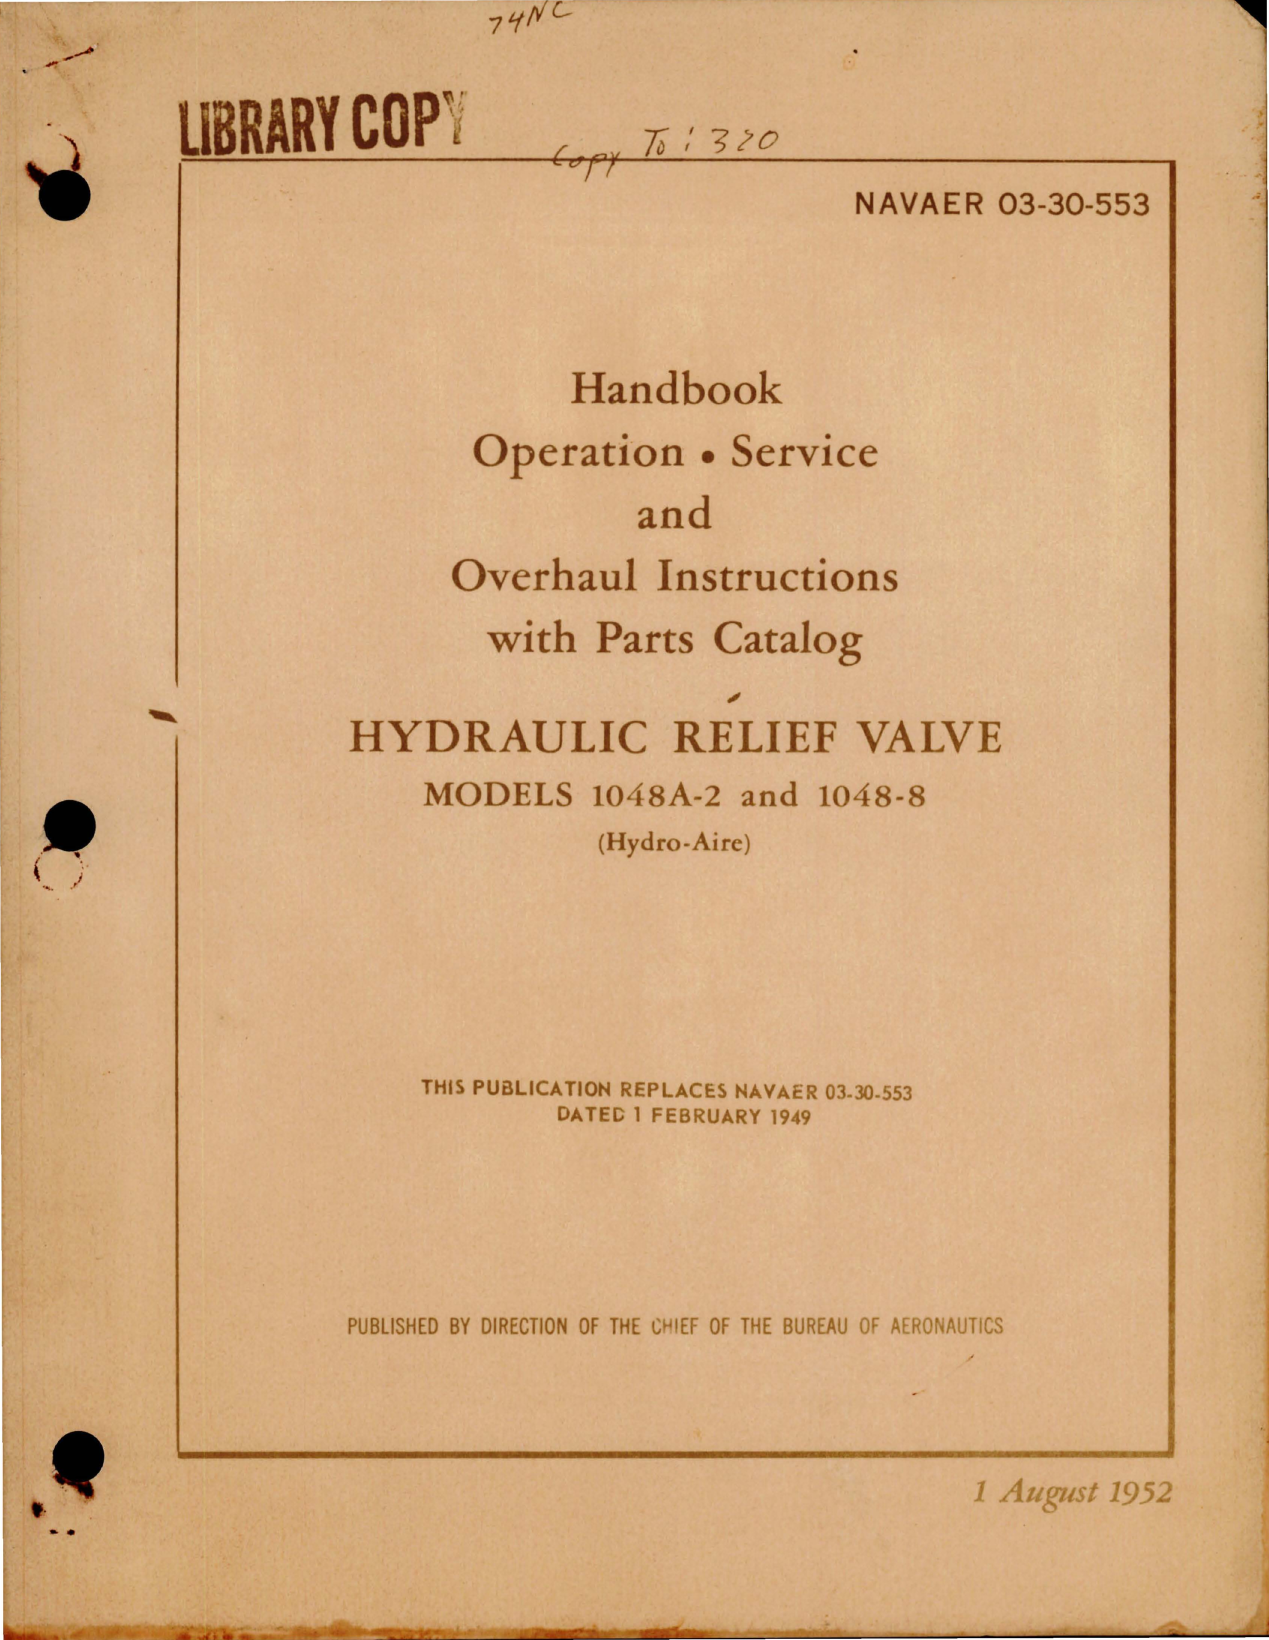 Sample page 1 from AirCorps Library document: Operation, Service and Overhaul Instructions with Parts Catalog for Hydraulic Relief Valve - Models 1048A-2 and 1048-8